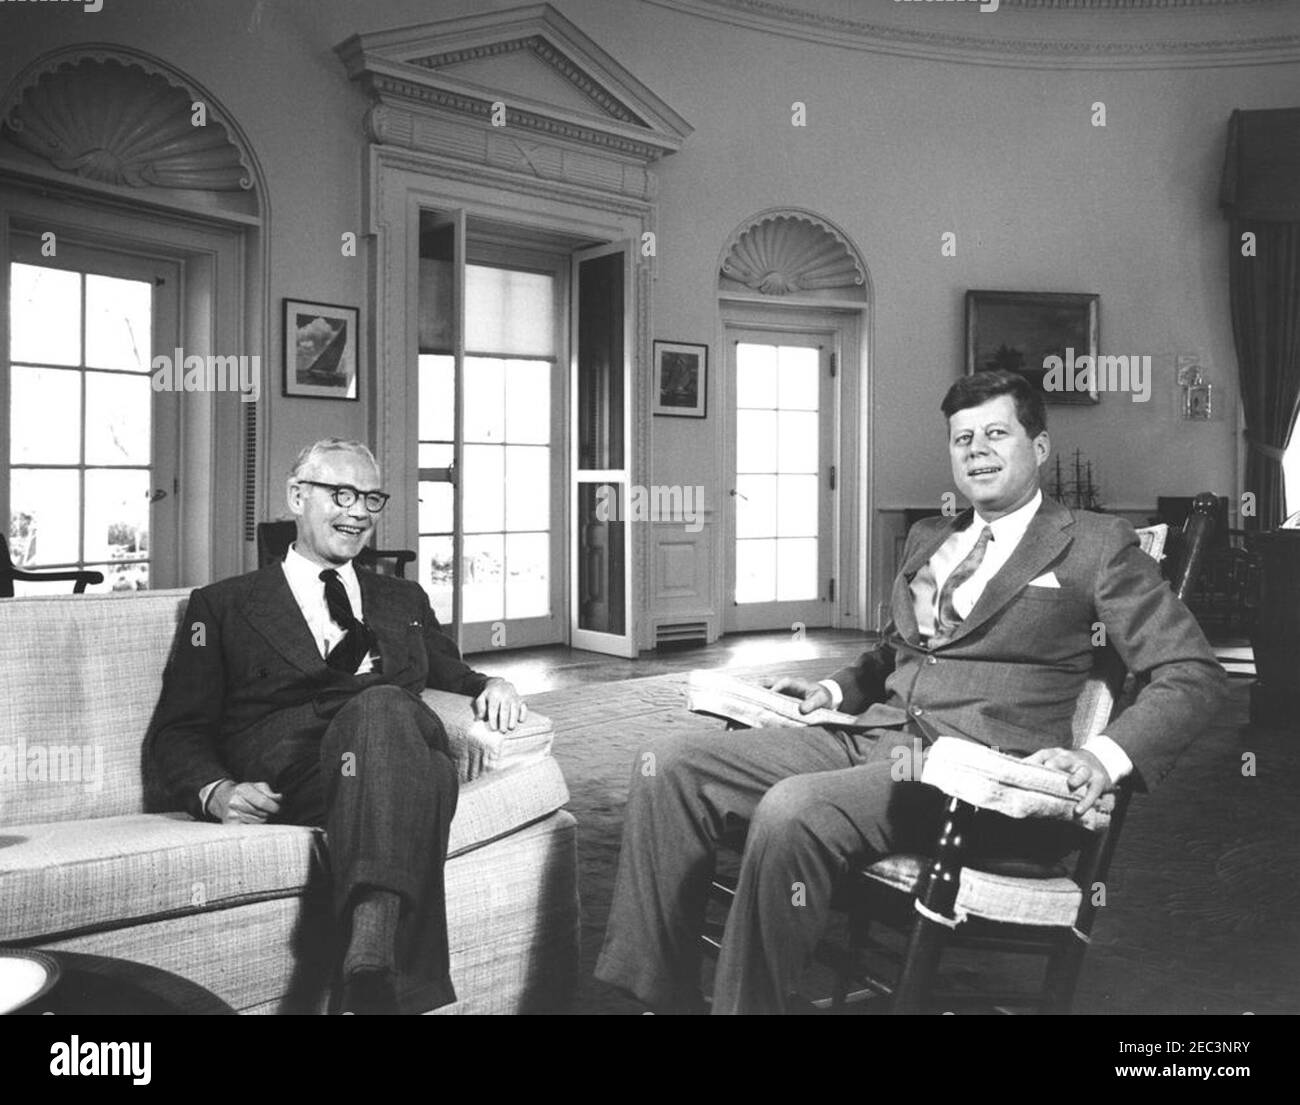 Meeting with the Ambassador of Canada, Arnold D. P. Heeney, 11:00AM. President John F. Kennedy (in rocking chair) meets with the Ambassador of Canada, Arnold (A.D.P.) Heeney in the Oval Office of the White House, Washington, D.C. Stock Photo